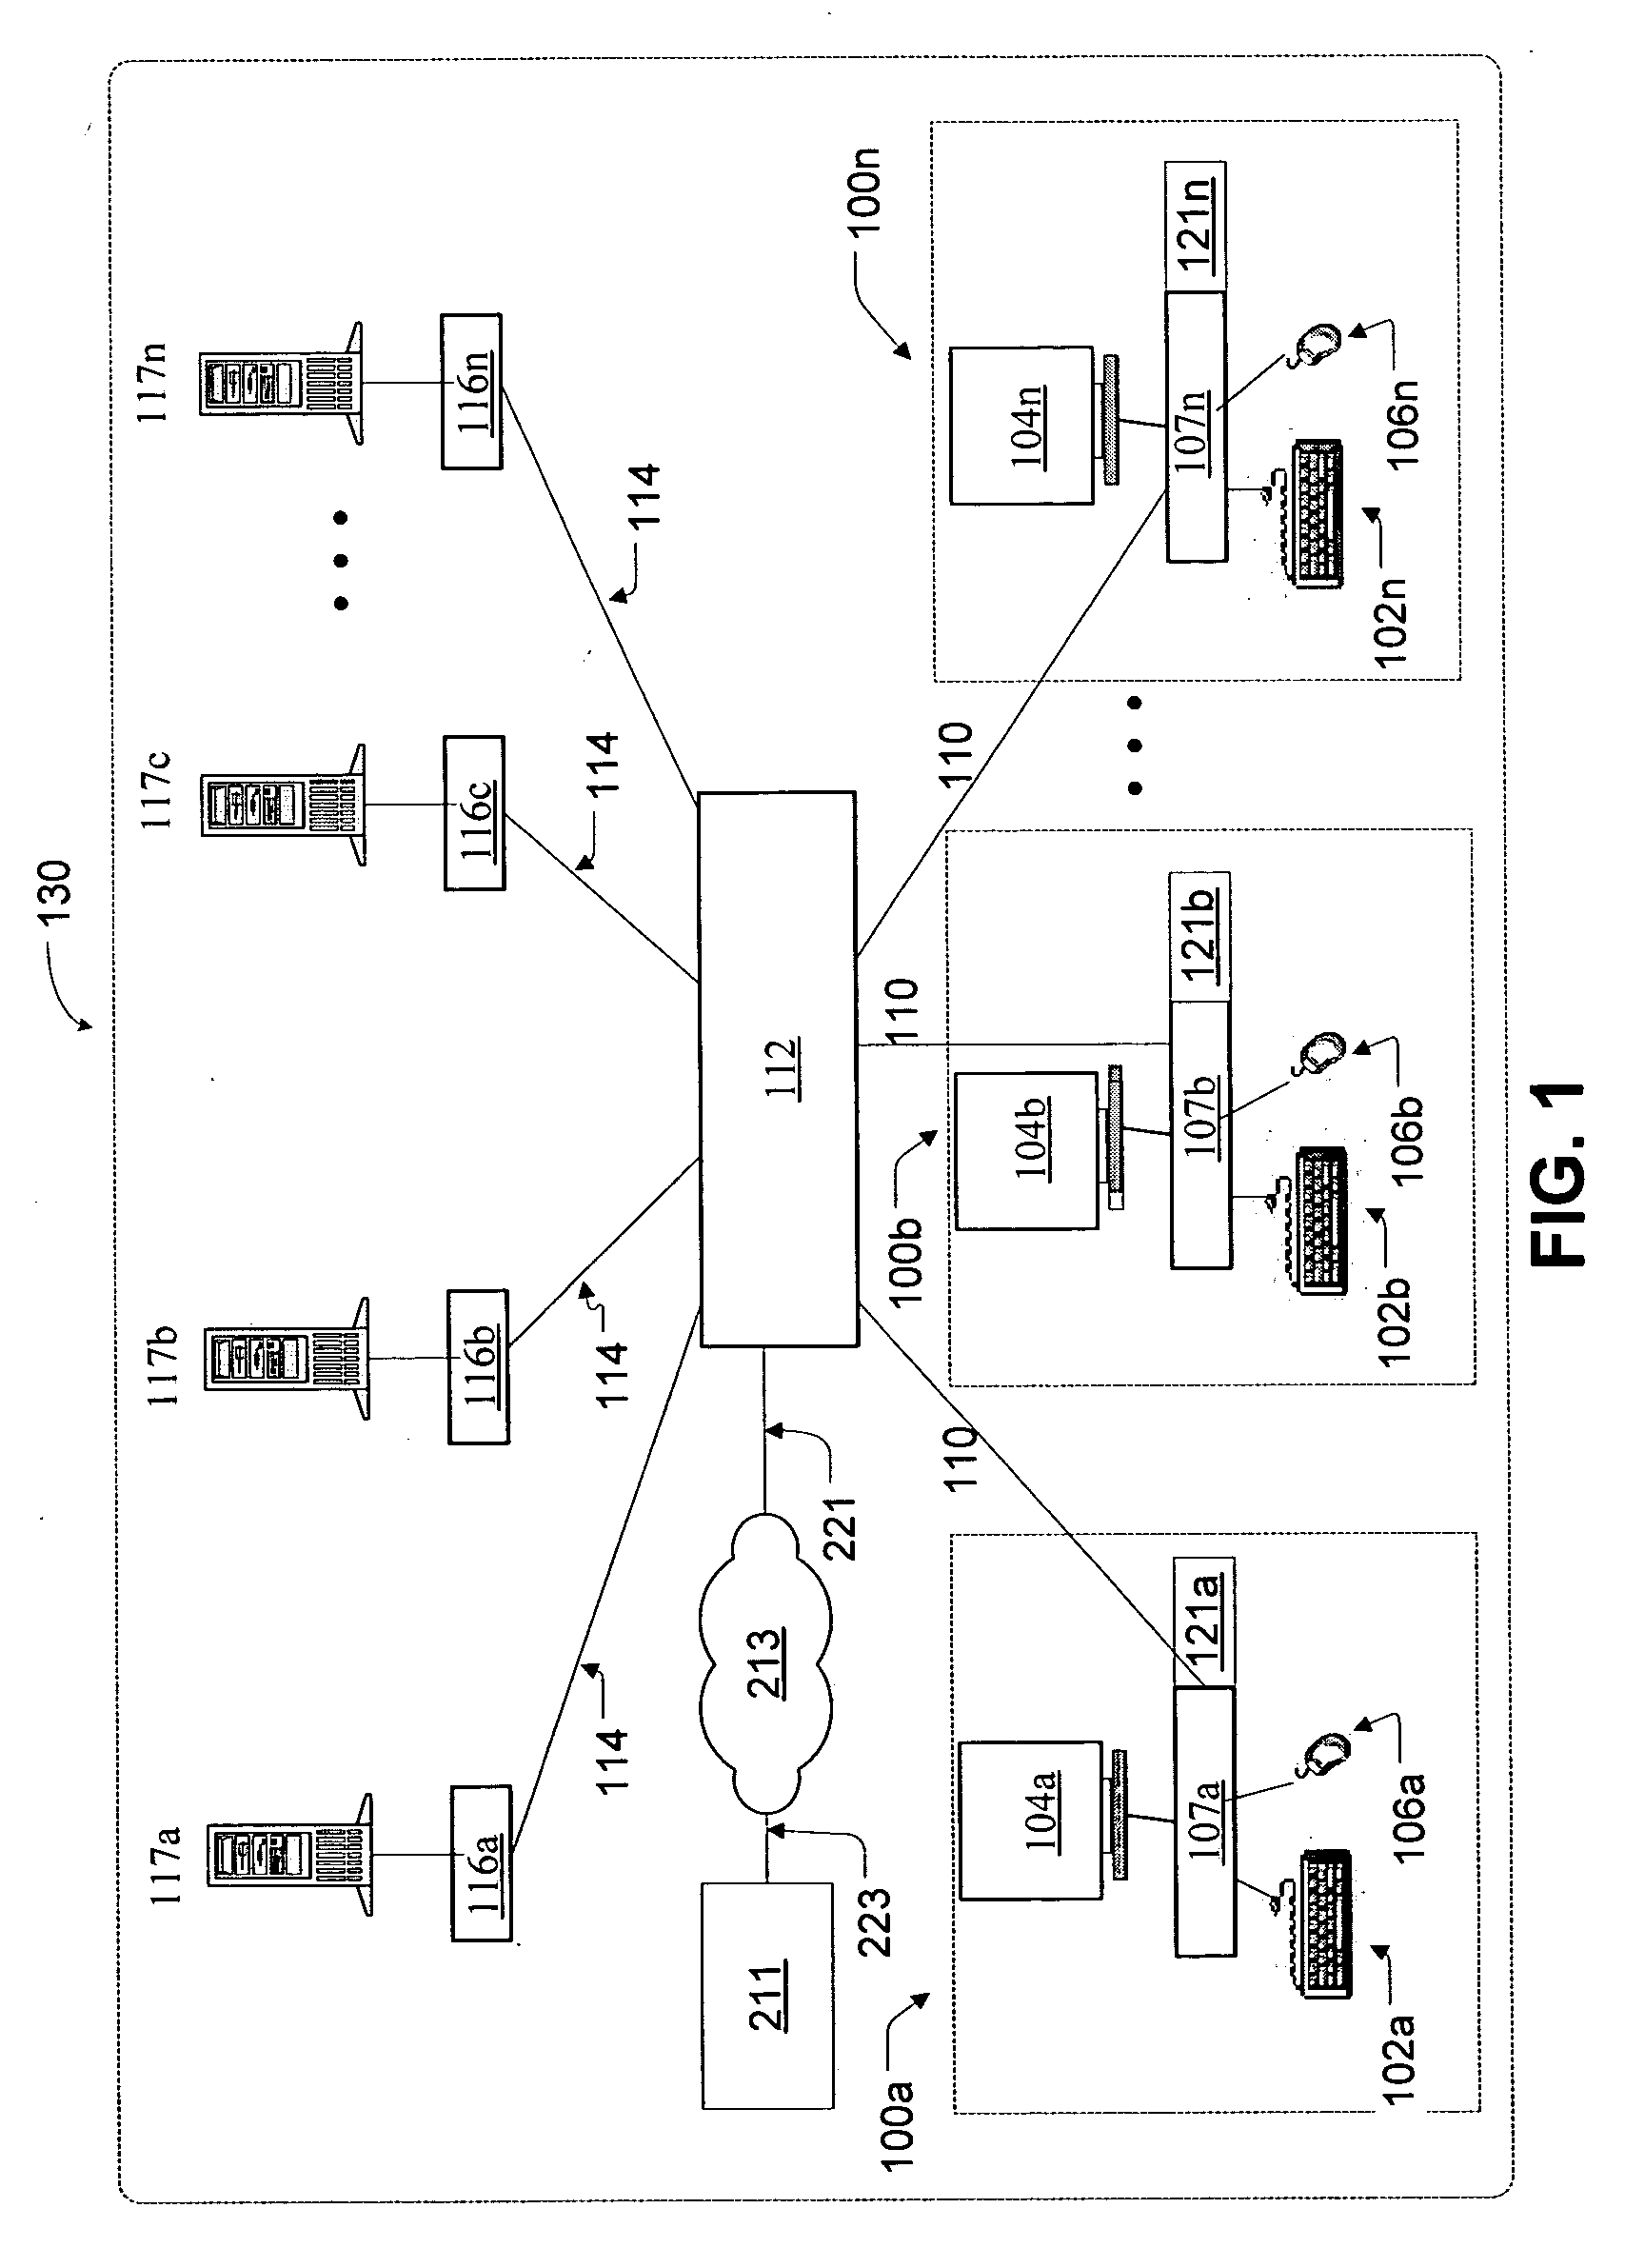 Means and method for providing secure access to KVM switch and other server management systems